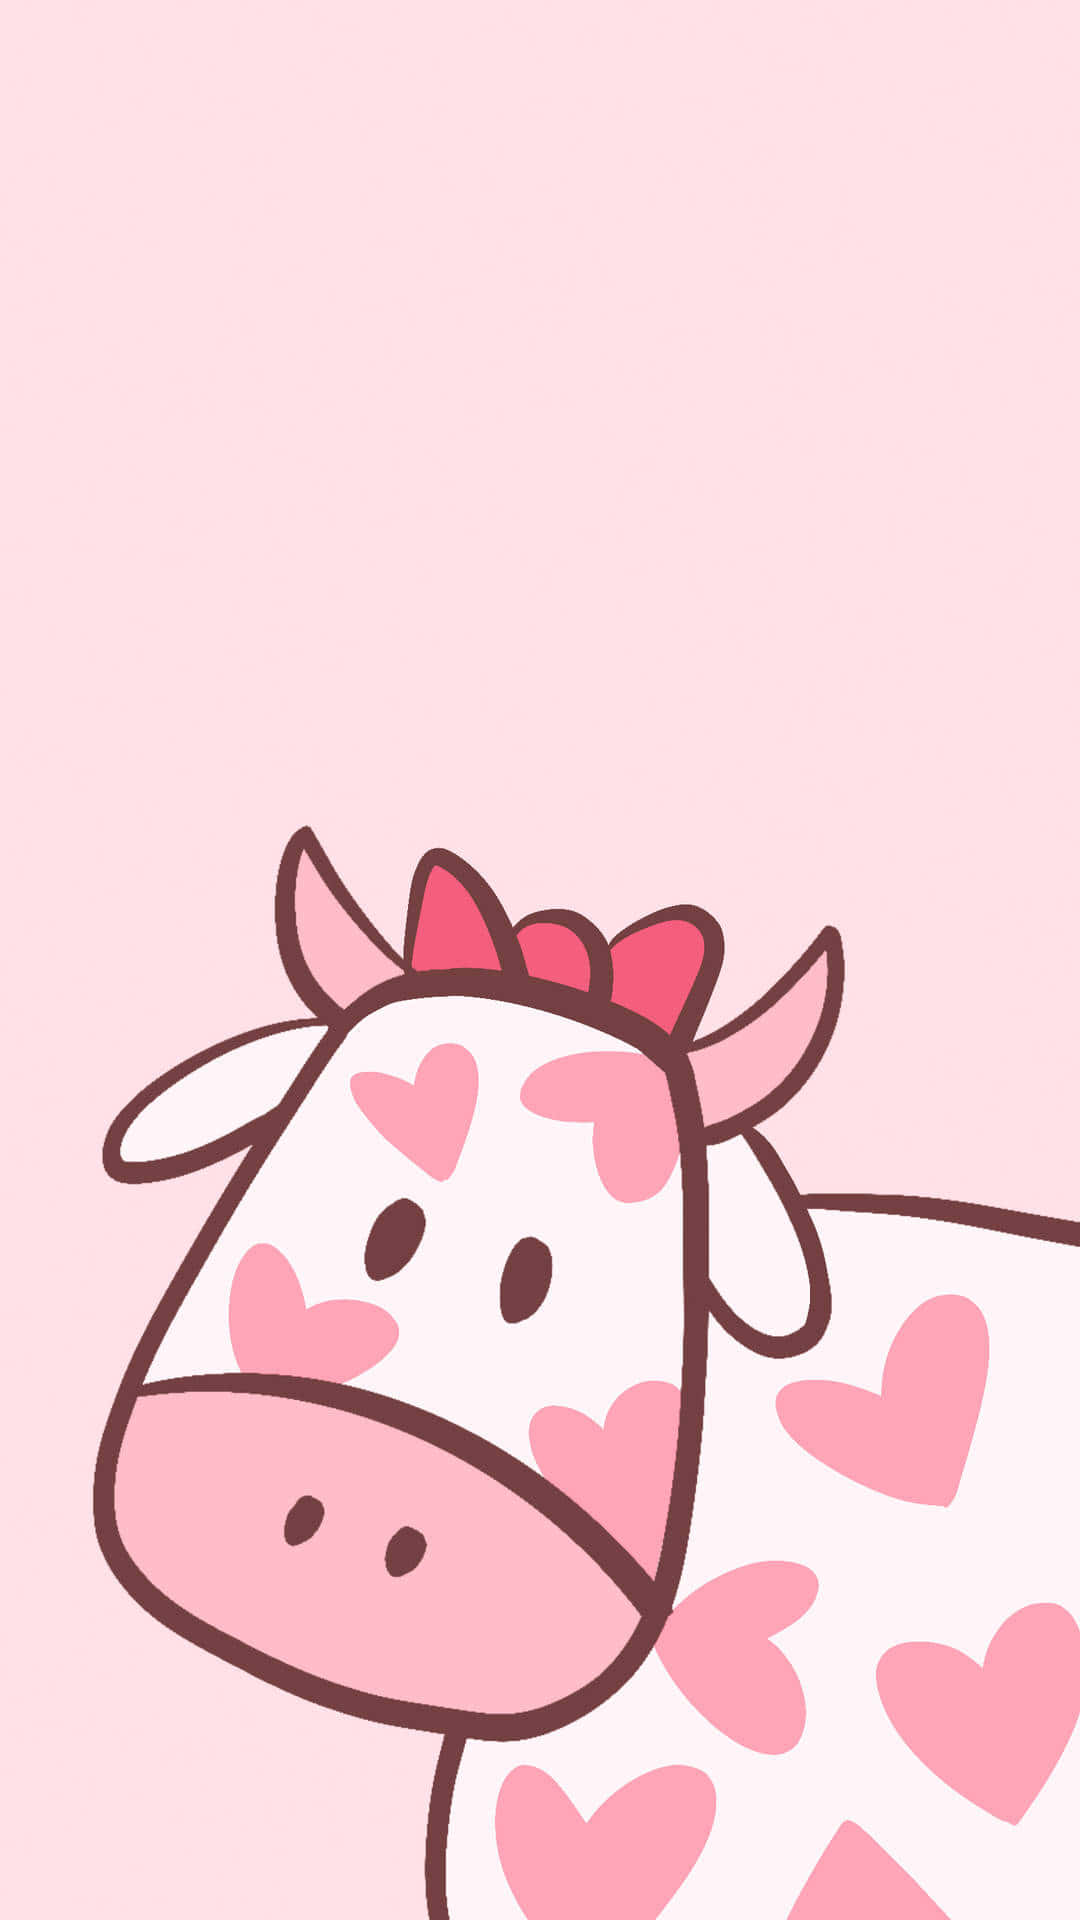 Download Strawberry Cow 1080 X 1920 Background | Wallpapers.com